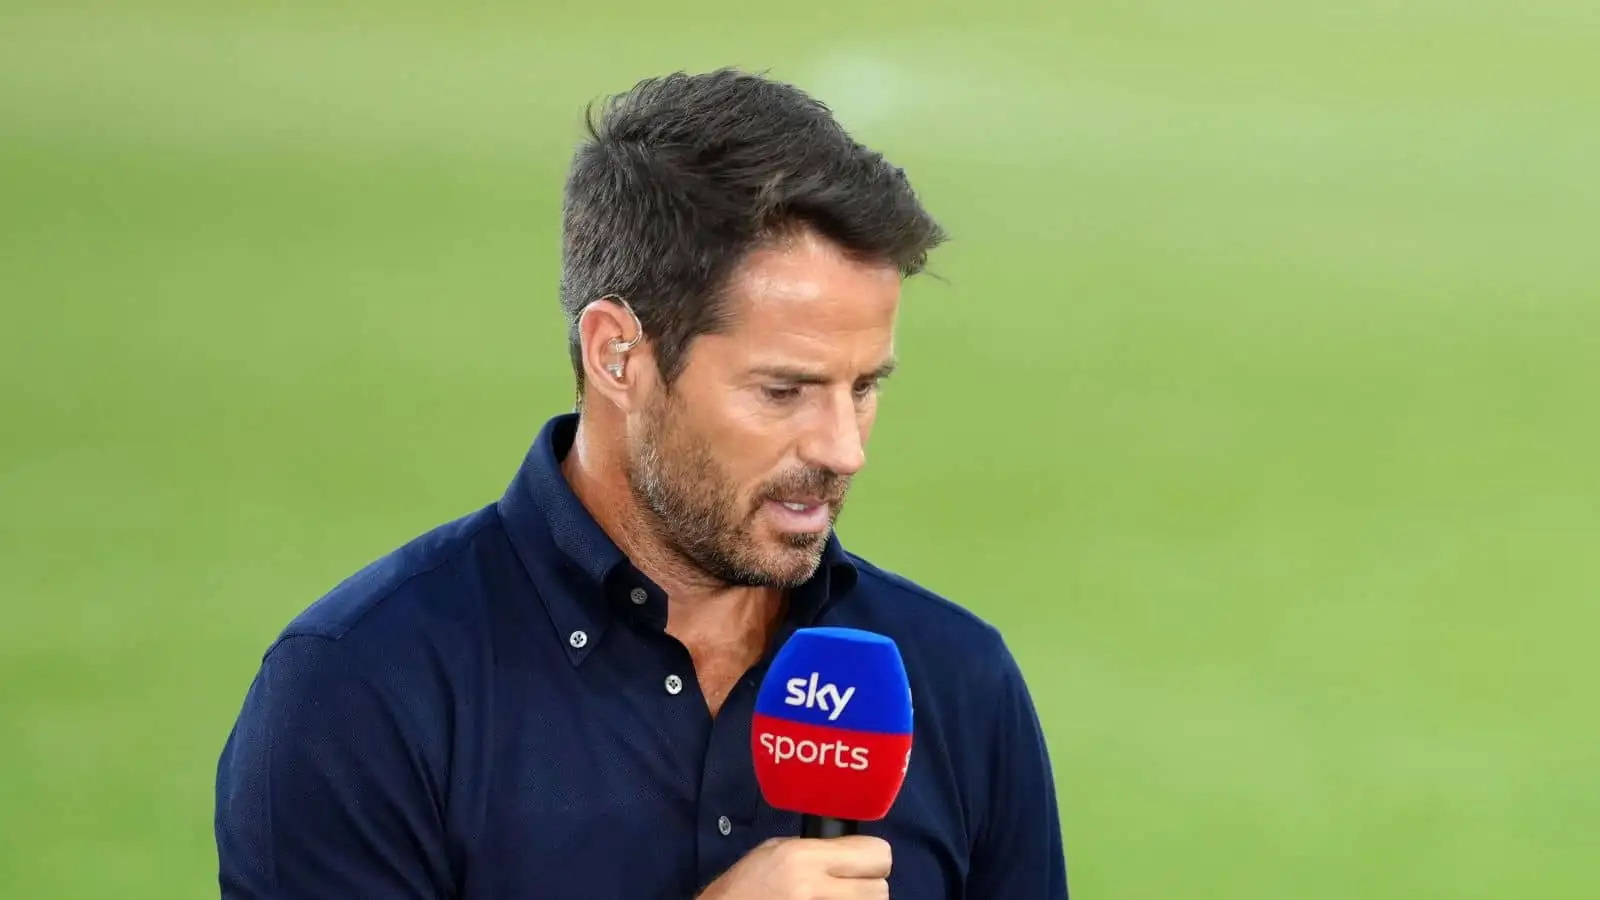 Jamie Redknapp after the Premier League match at the Gtech Community Stadium, Brentford